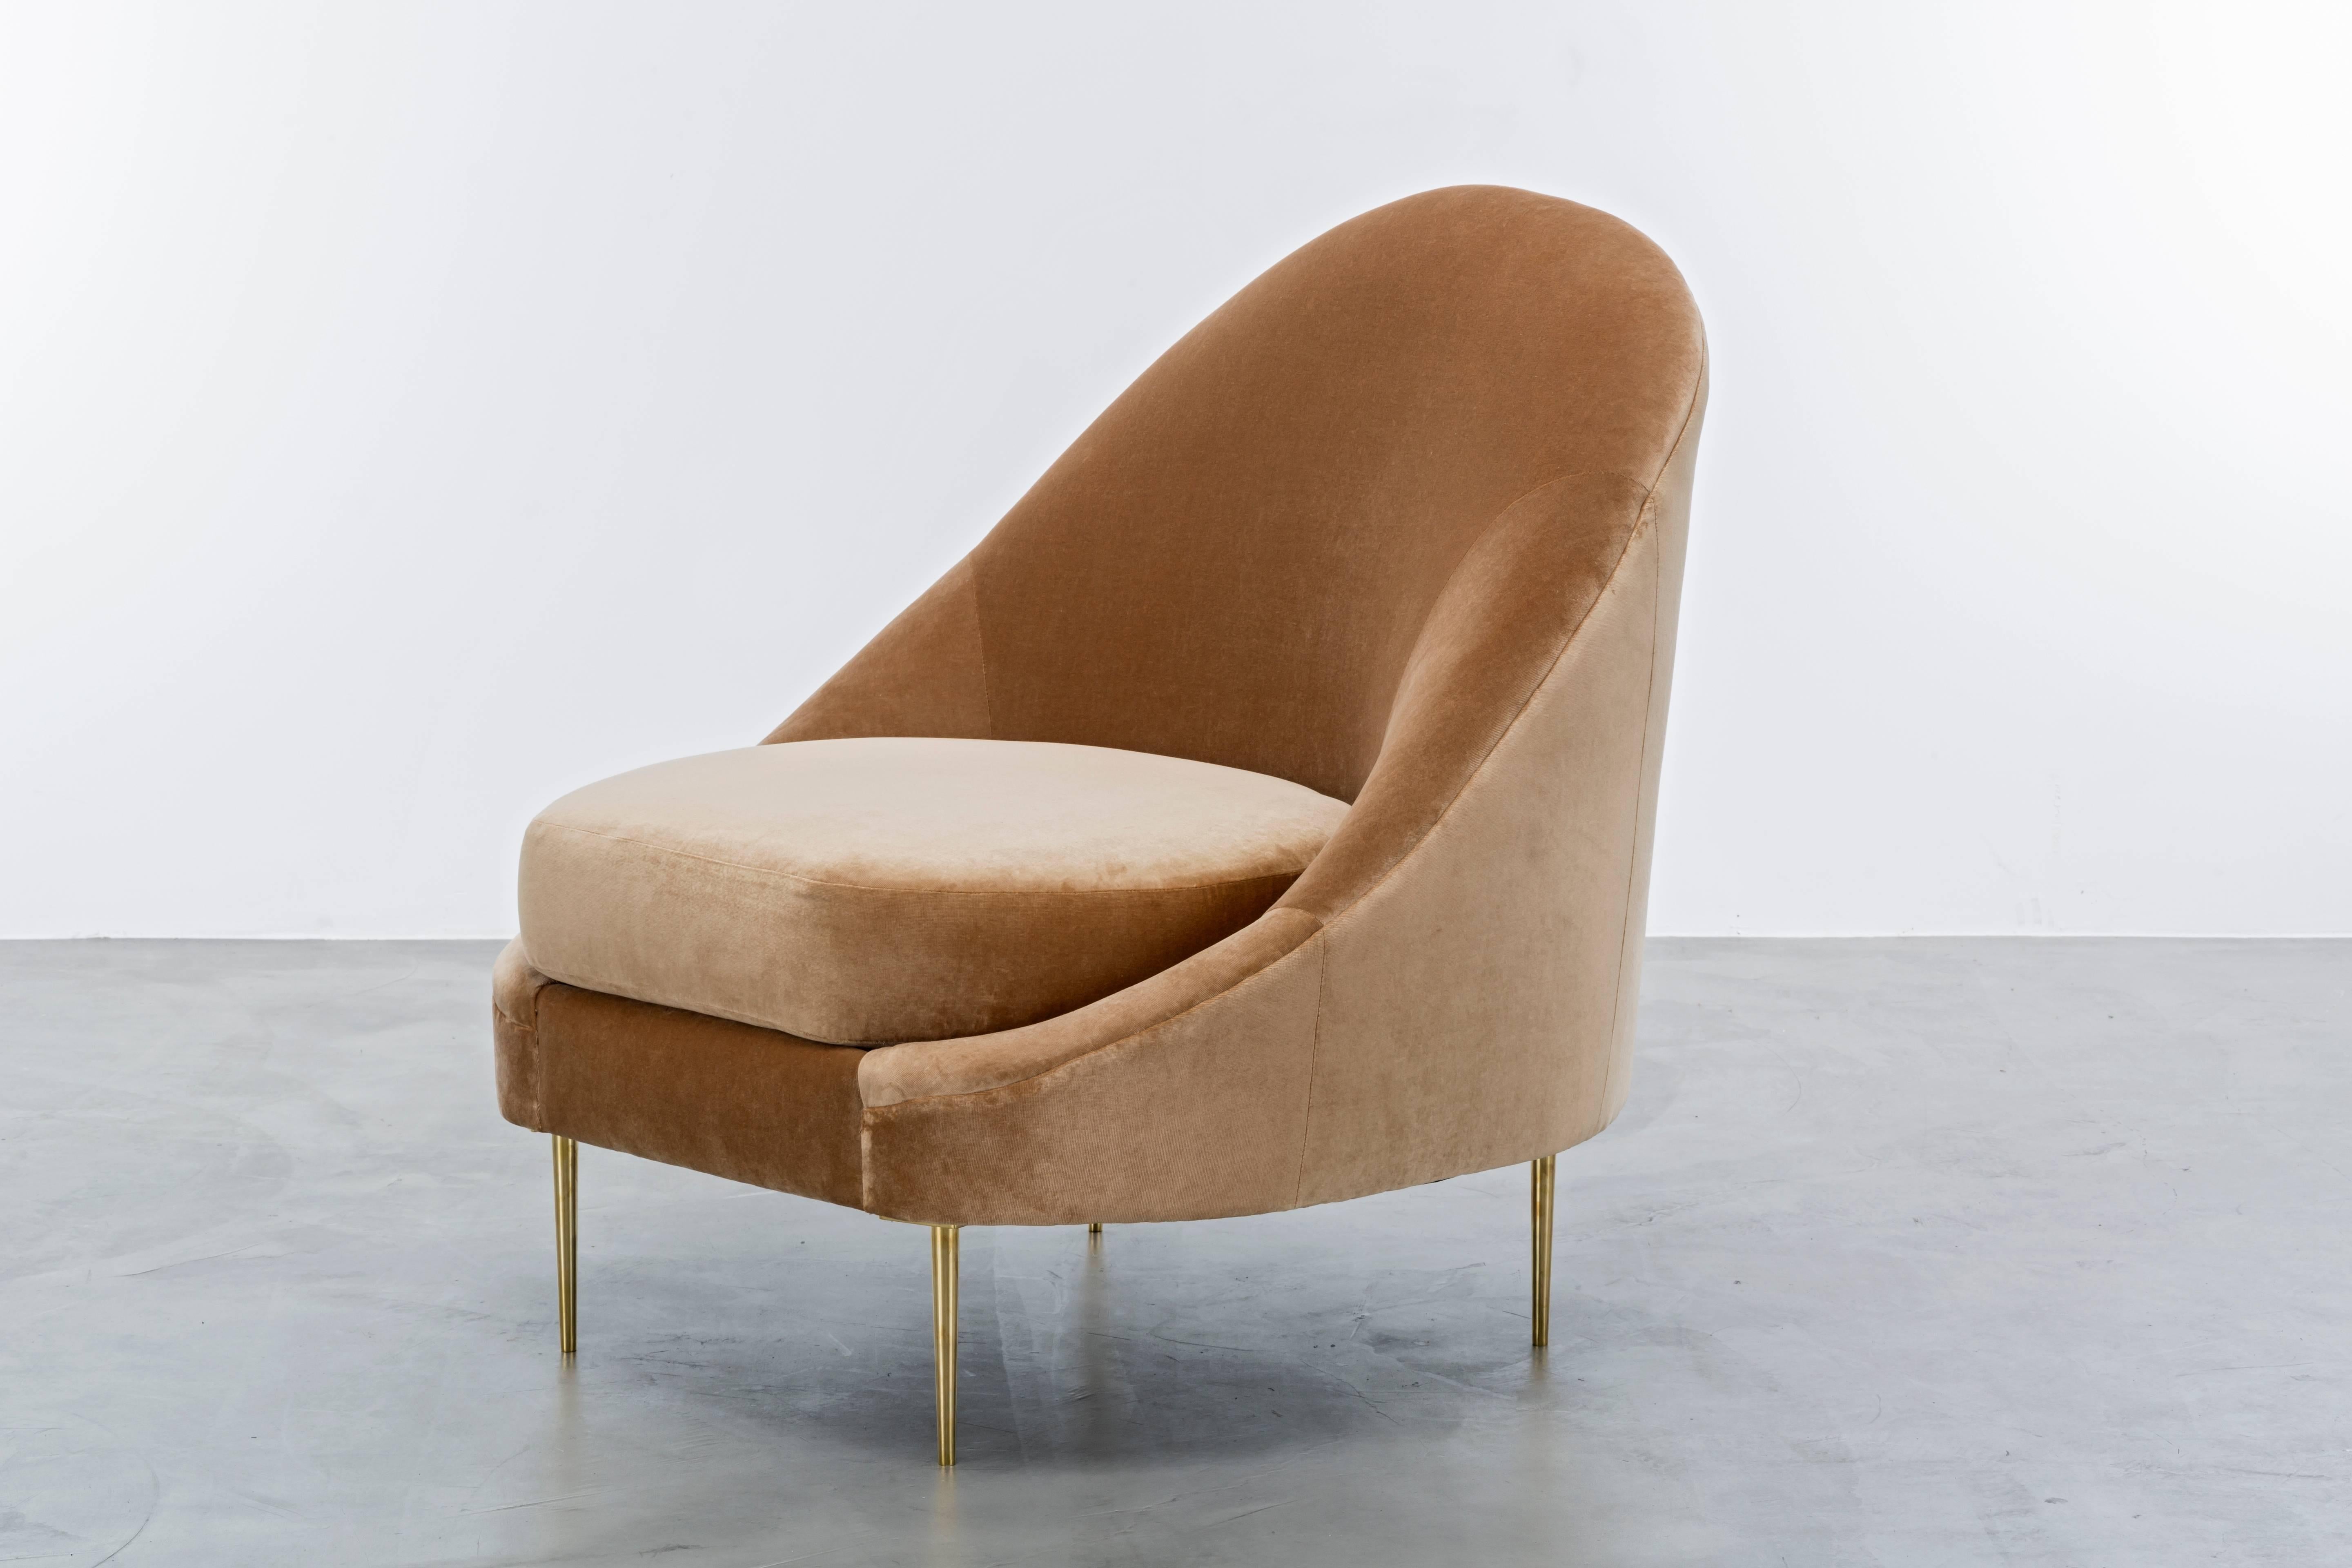 SANDRINE CHAIR - Modern Asymmetrical Velvet Lounge with Solid Brass Legs

The Sandrine Chair is a high-end luxury item that takes inspiration from Gaudi architecture and features a unique and sophisticated design. The chair's asymmetrical velvet